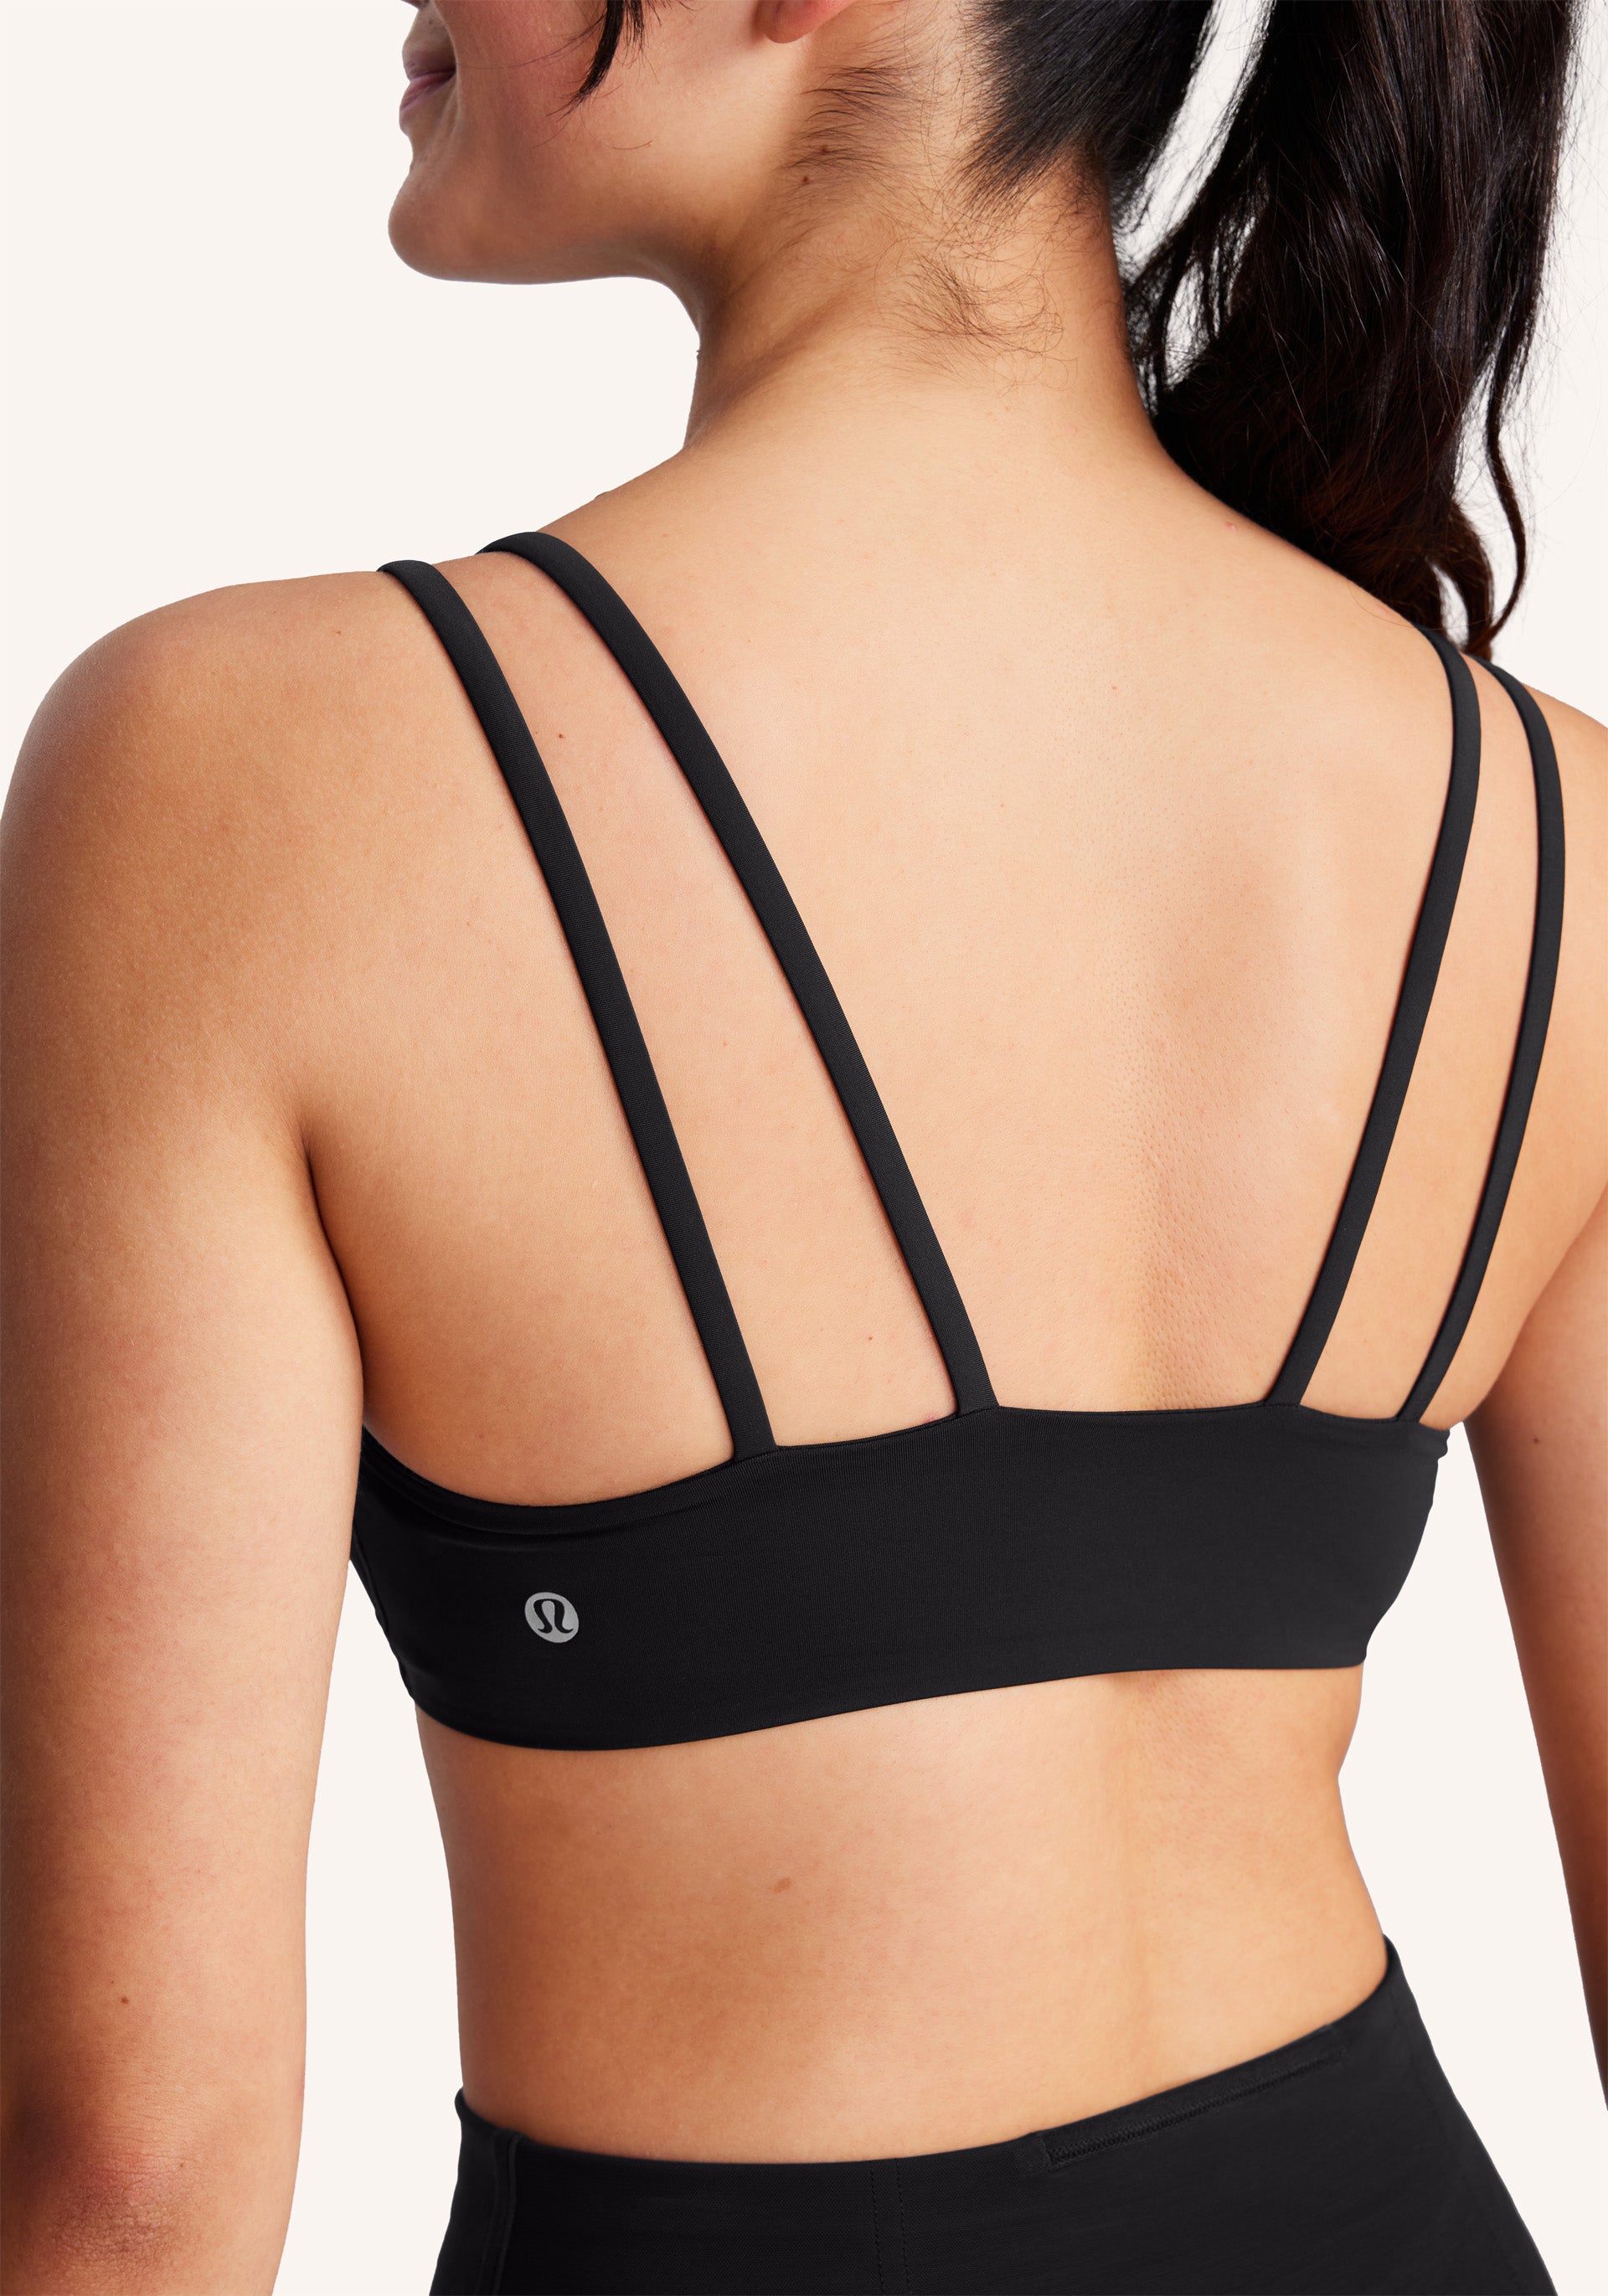 Lululemon Free To Be Wild Bra Size M - $49 New With Tags - From Morgan